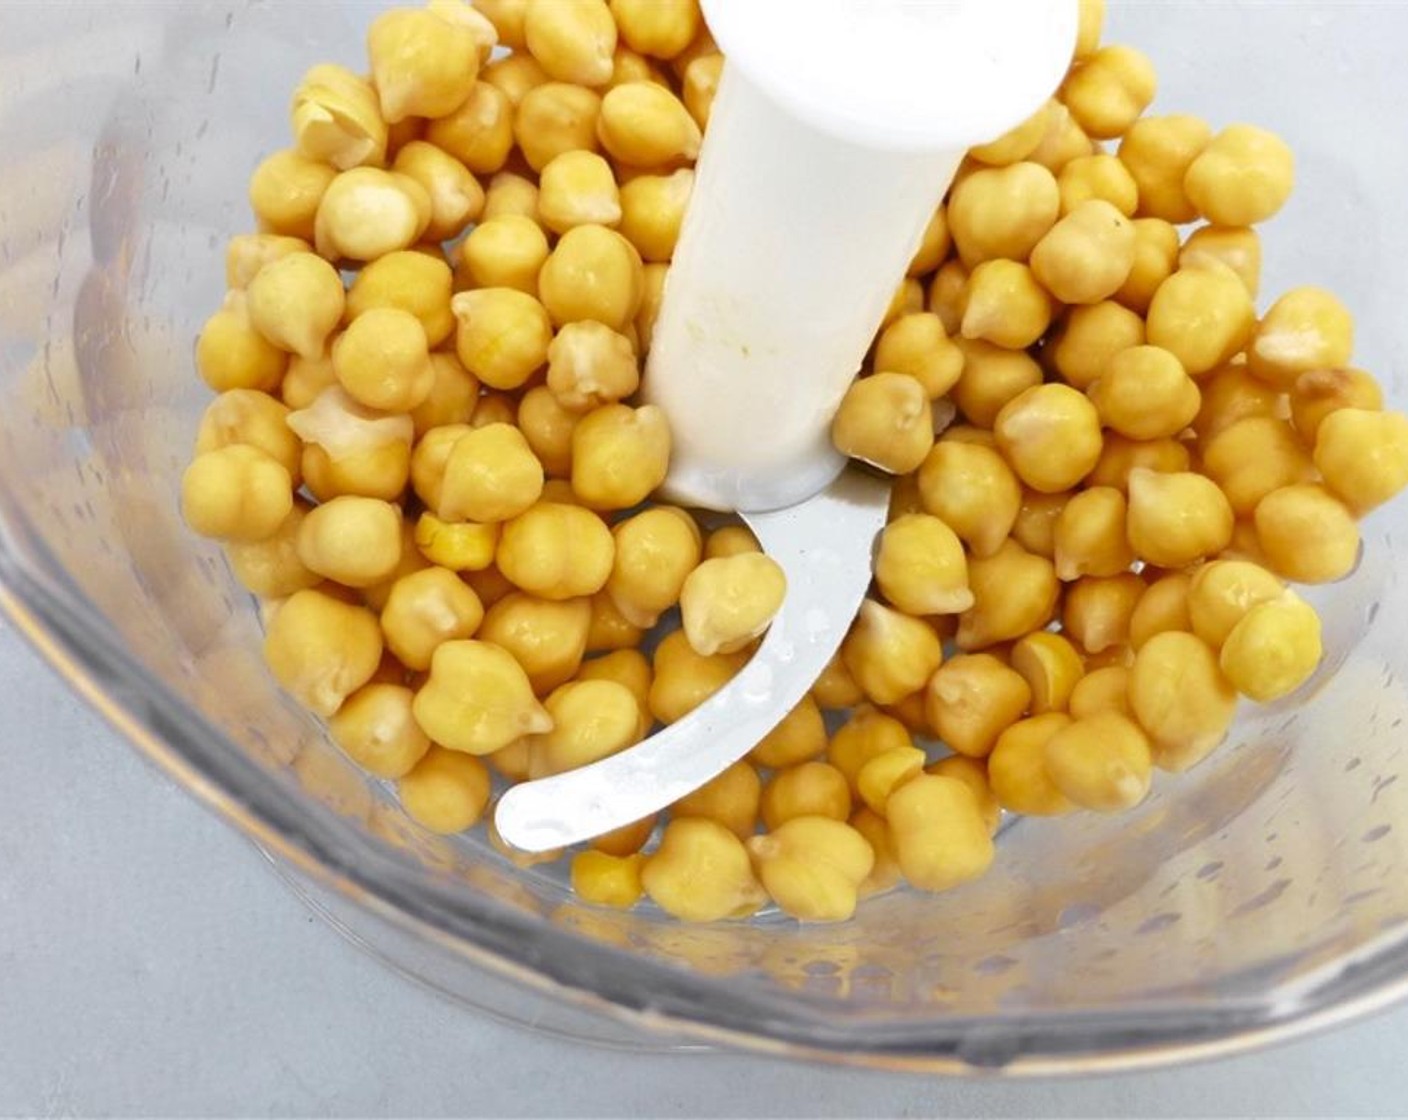 step 2 Rinse the chickpeas and drain well. Add them to a clean blender.